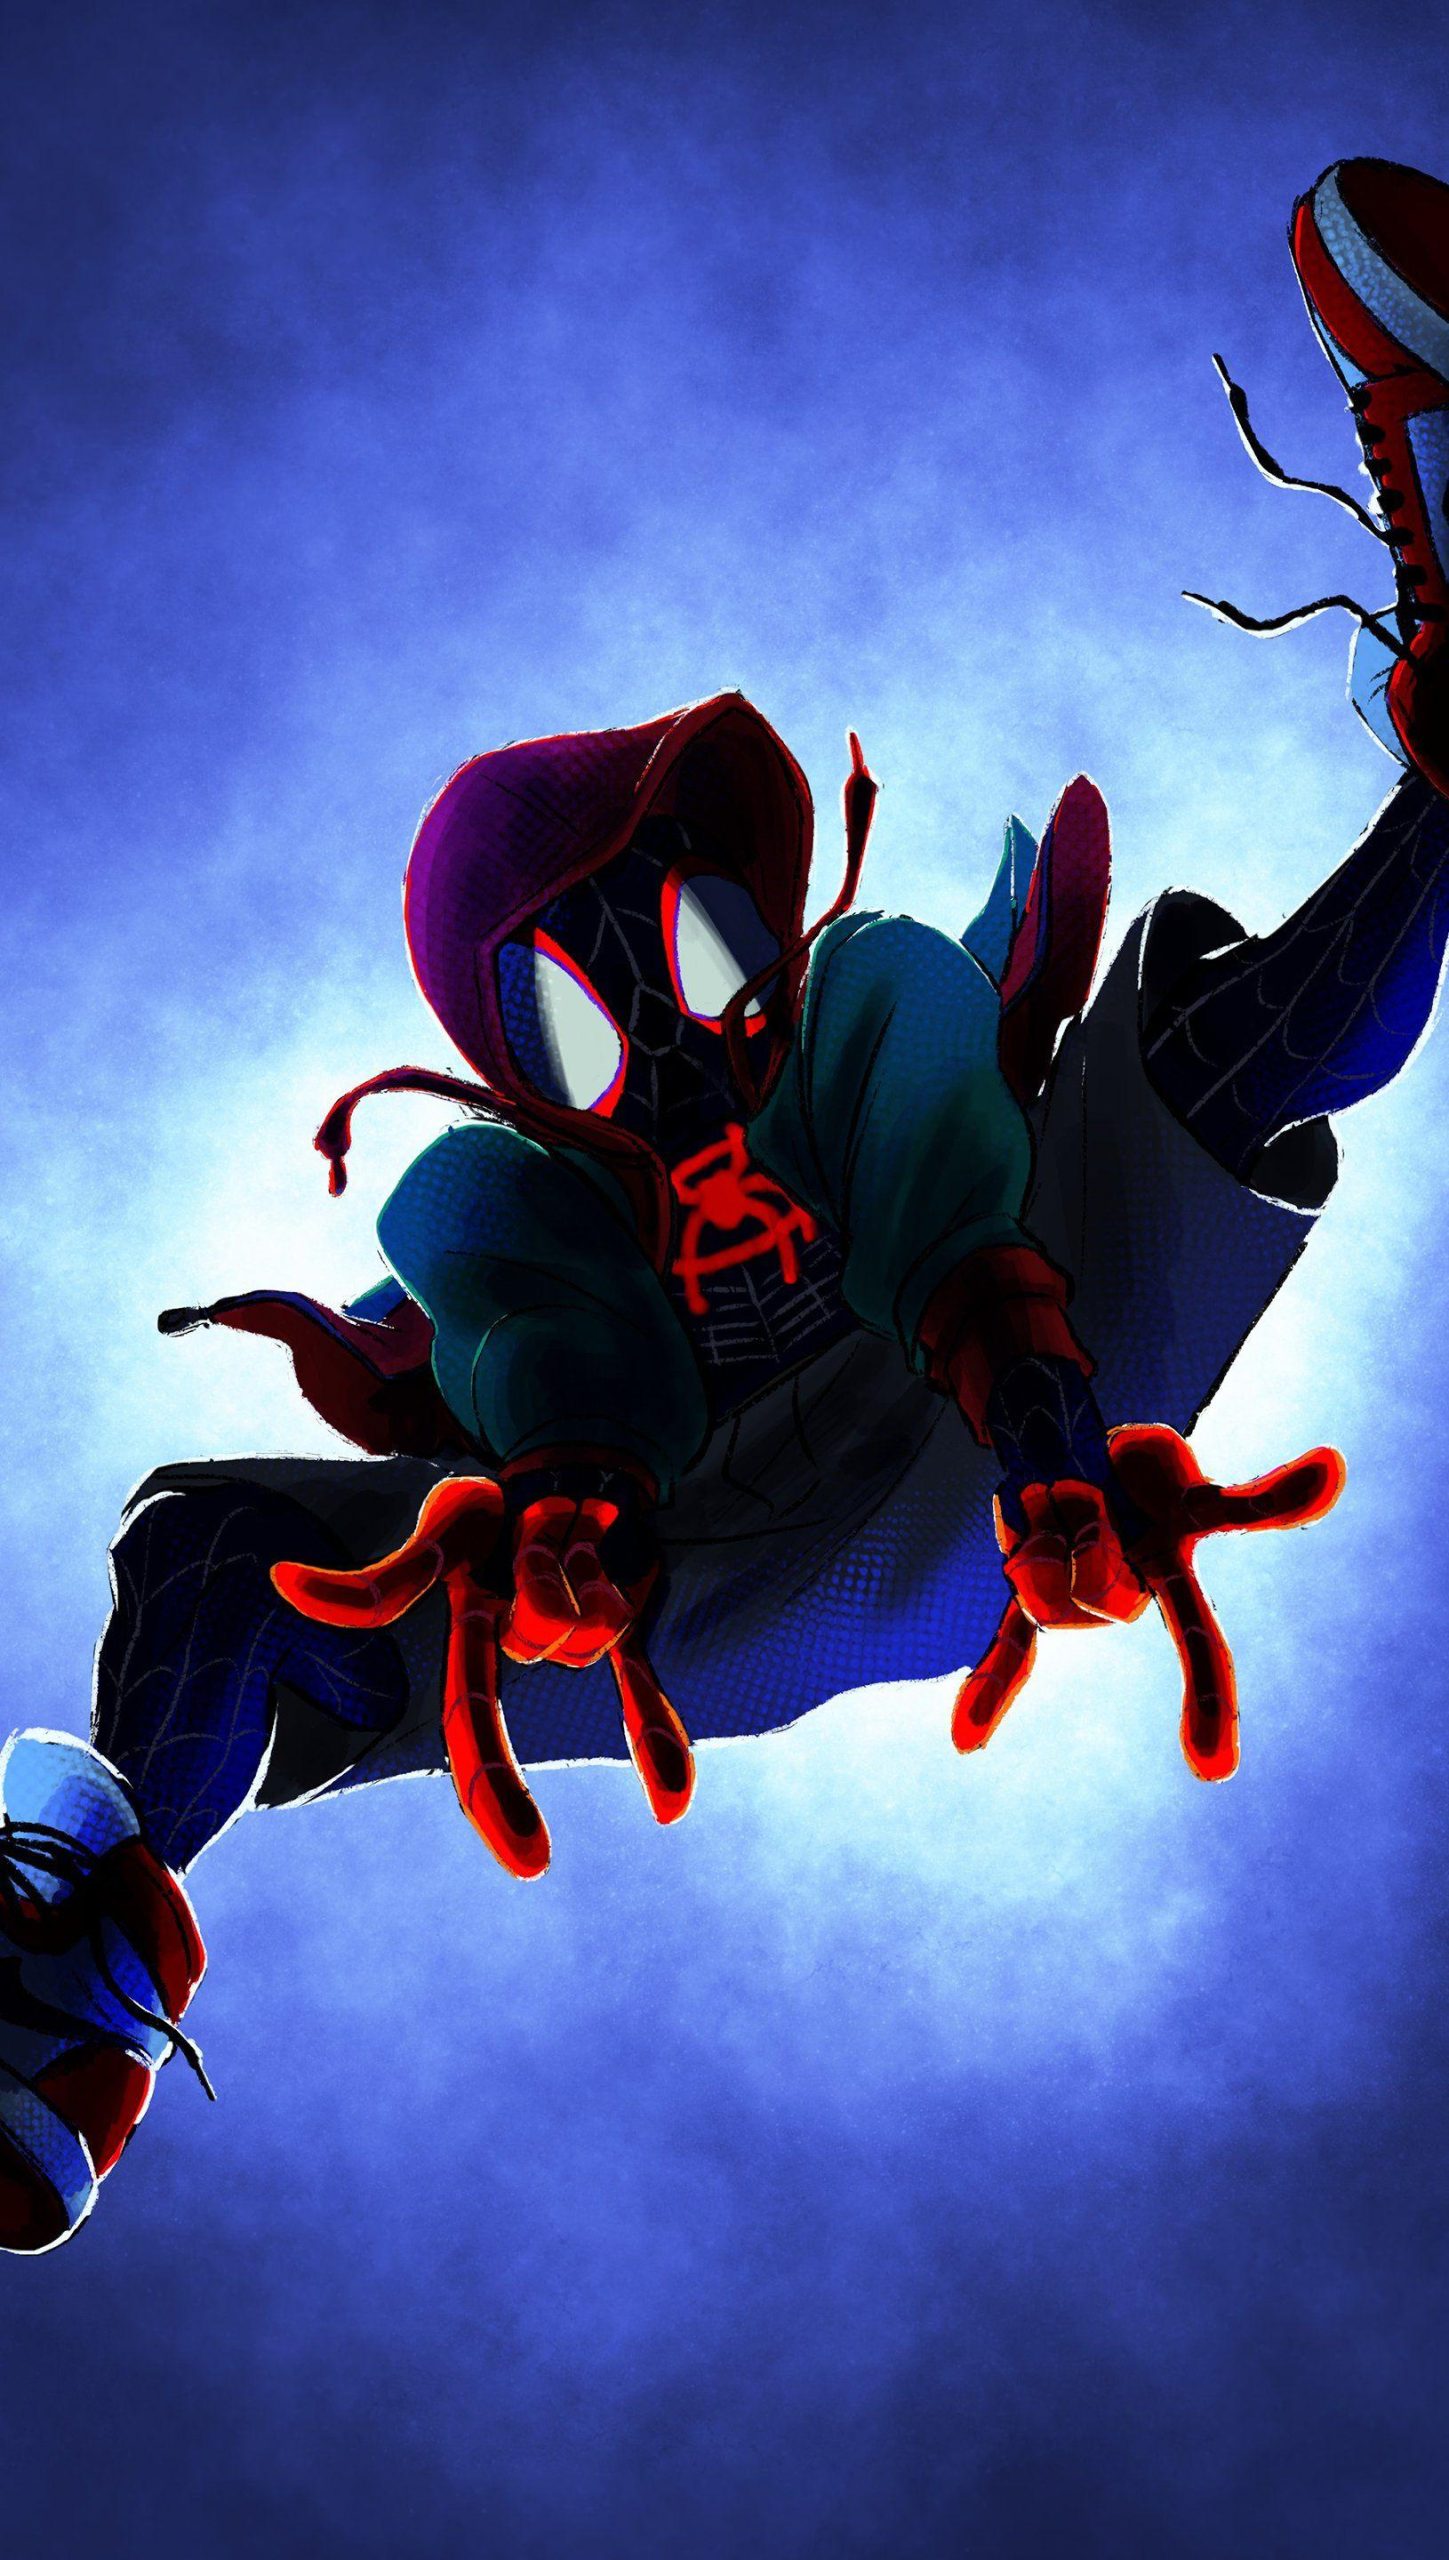 Spider-Man And Miles Morales Wallpaper Download, Spider-Man And Miles Morales, Movies